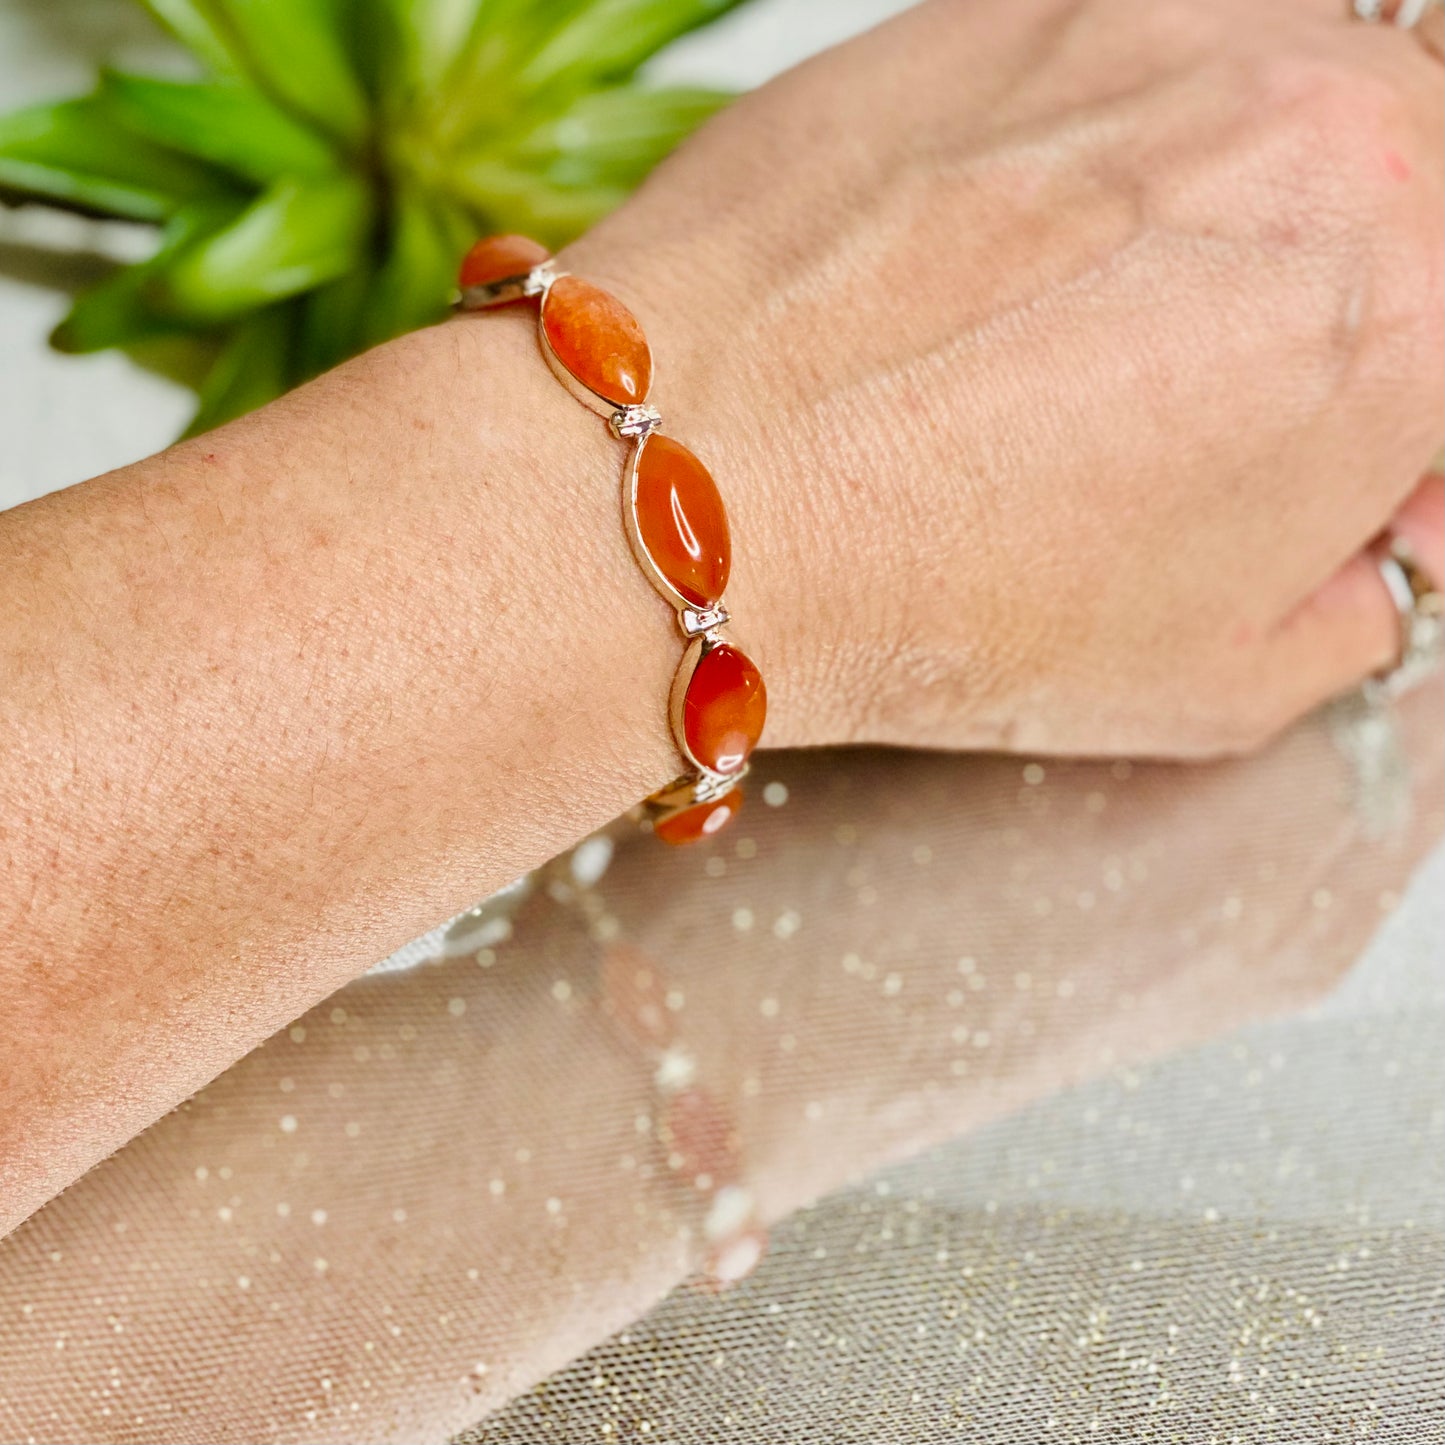 Solar Glow Vibrant Healing Energy: Carnelian Bracelet in Sterling Silver with Toggle Clasp